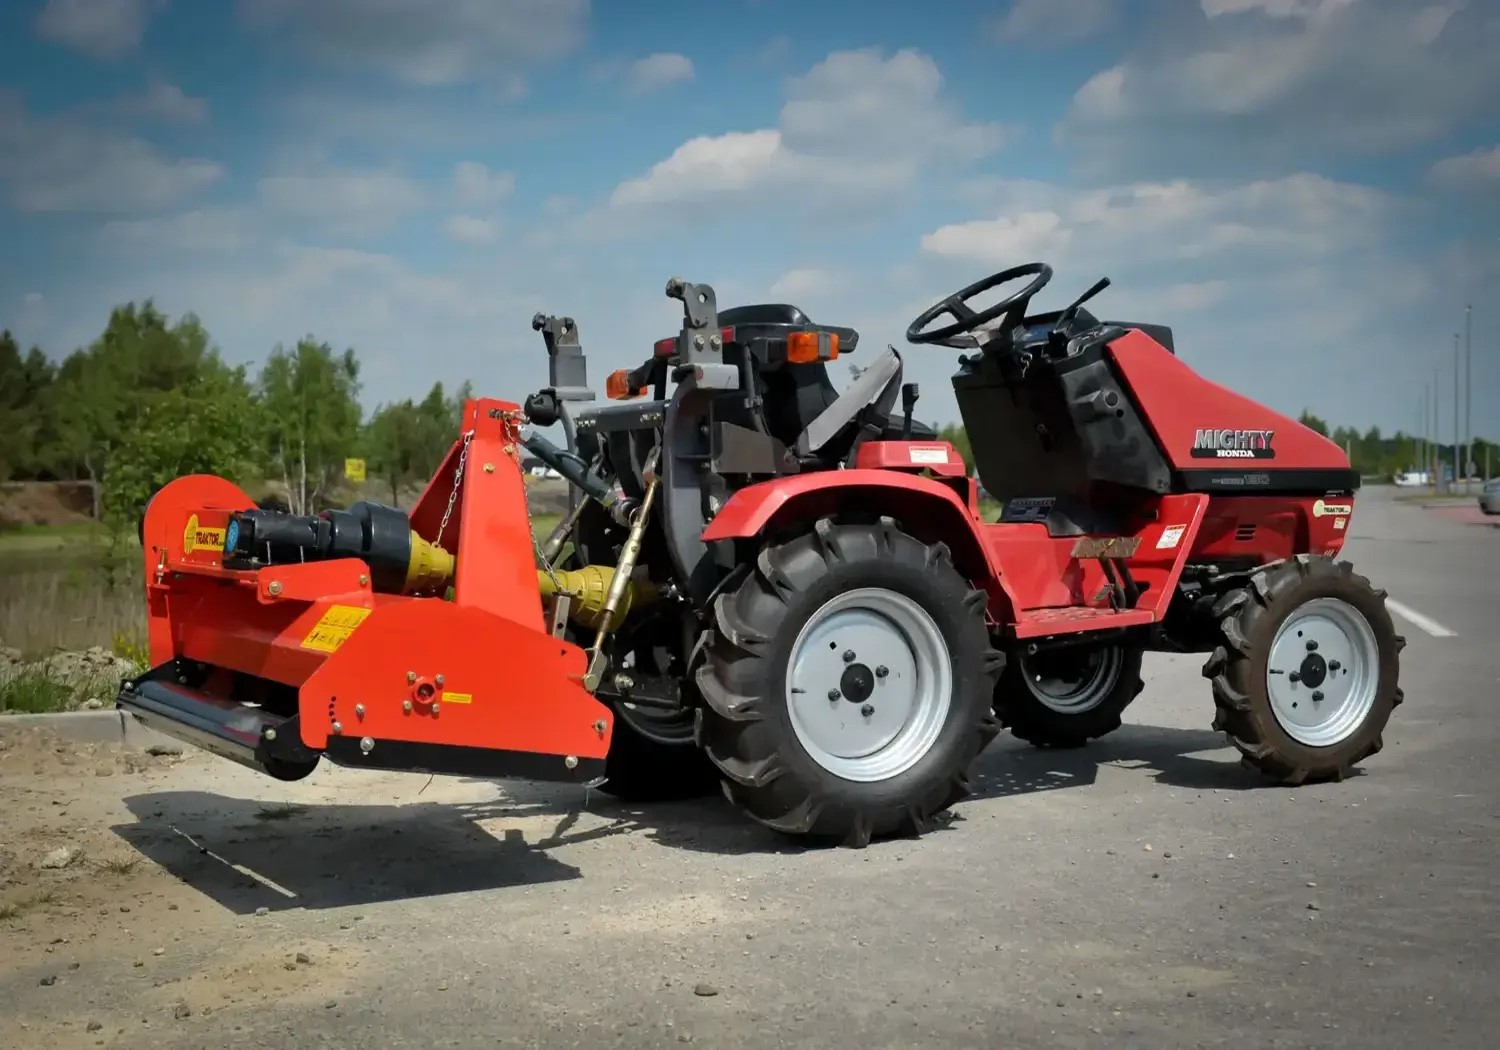 Honda Mighty 130 4x4 13KM + flail mower with Y-type knives EF95 mulcher